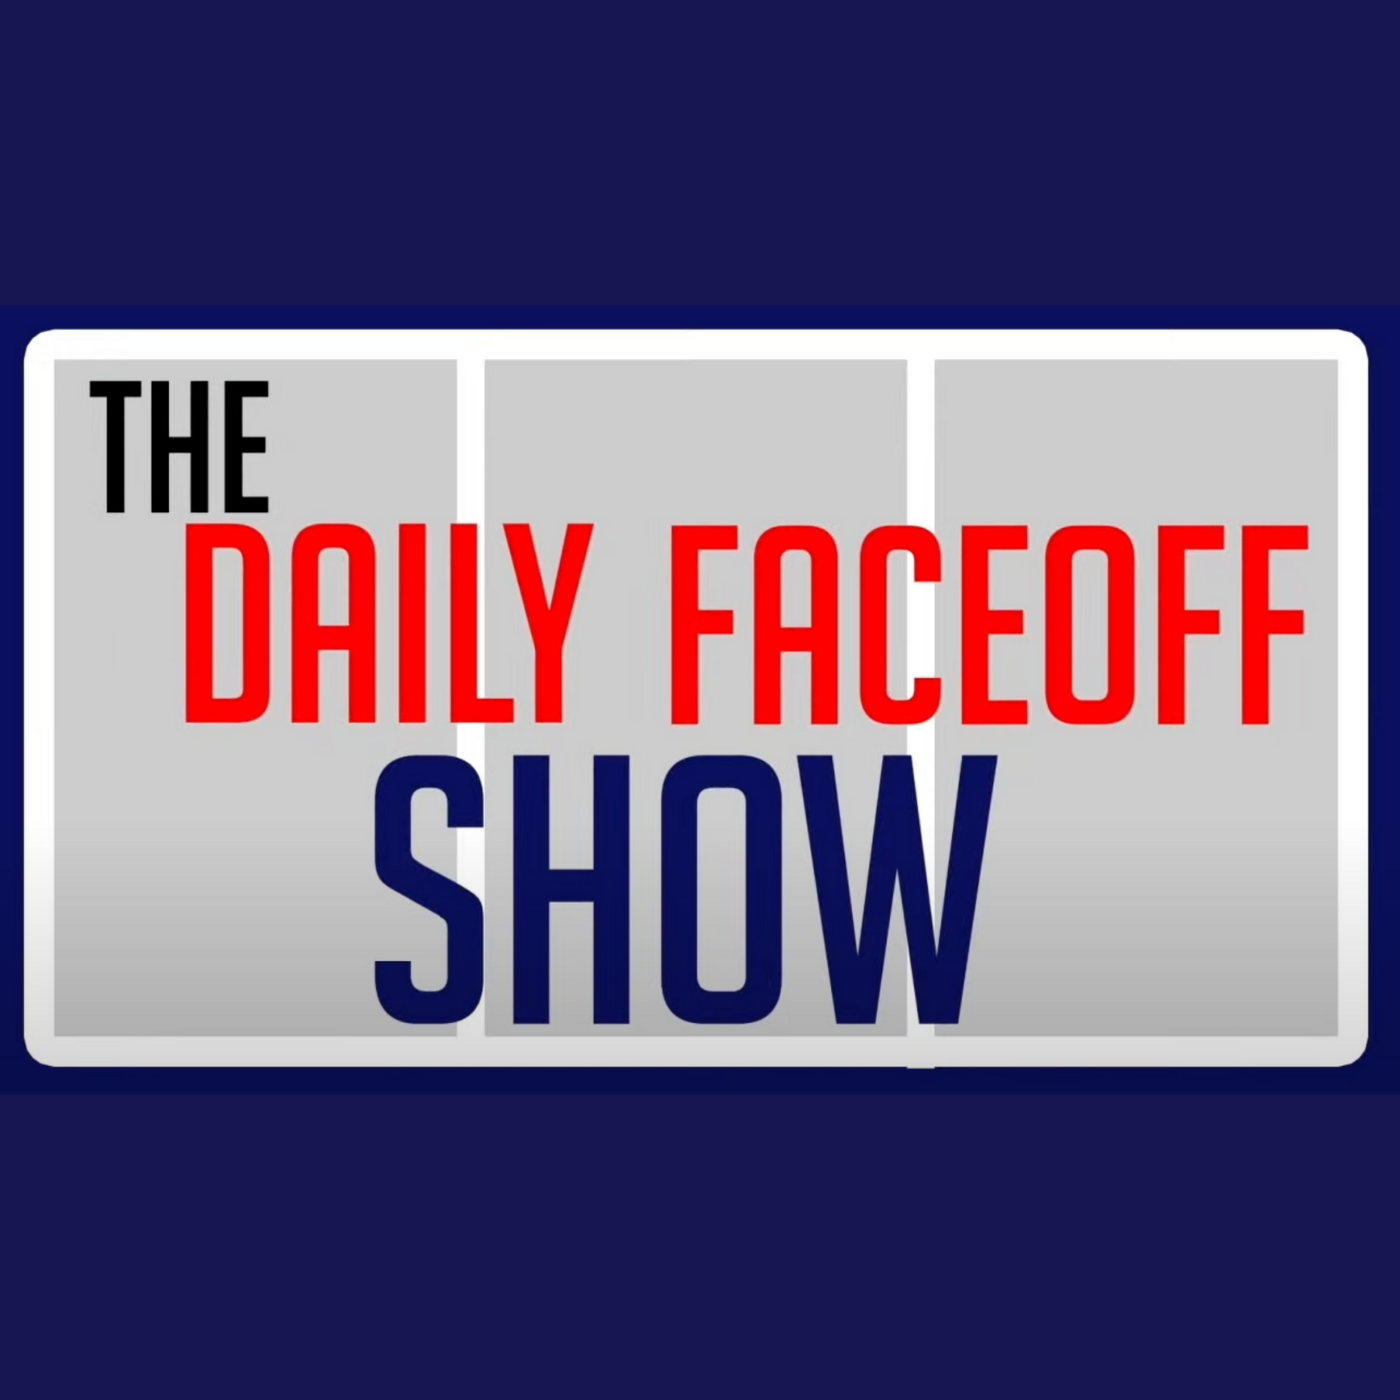 June 22nd - The Daily Faceoff Show - Feat. Frank Seravalli & Mike McKenna